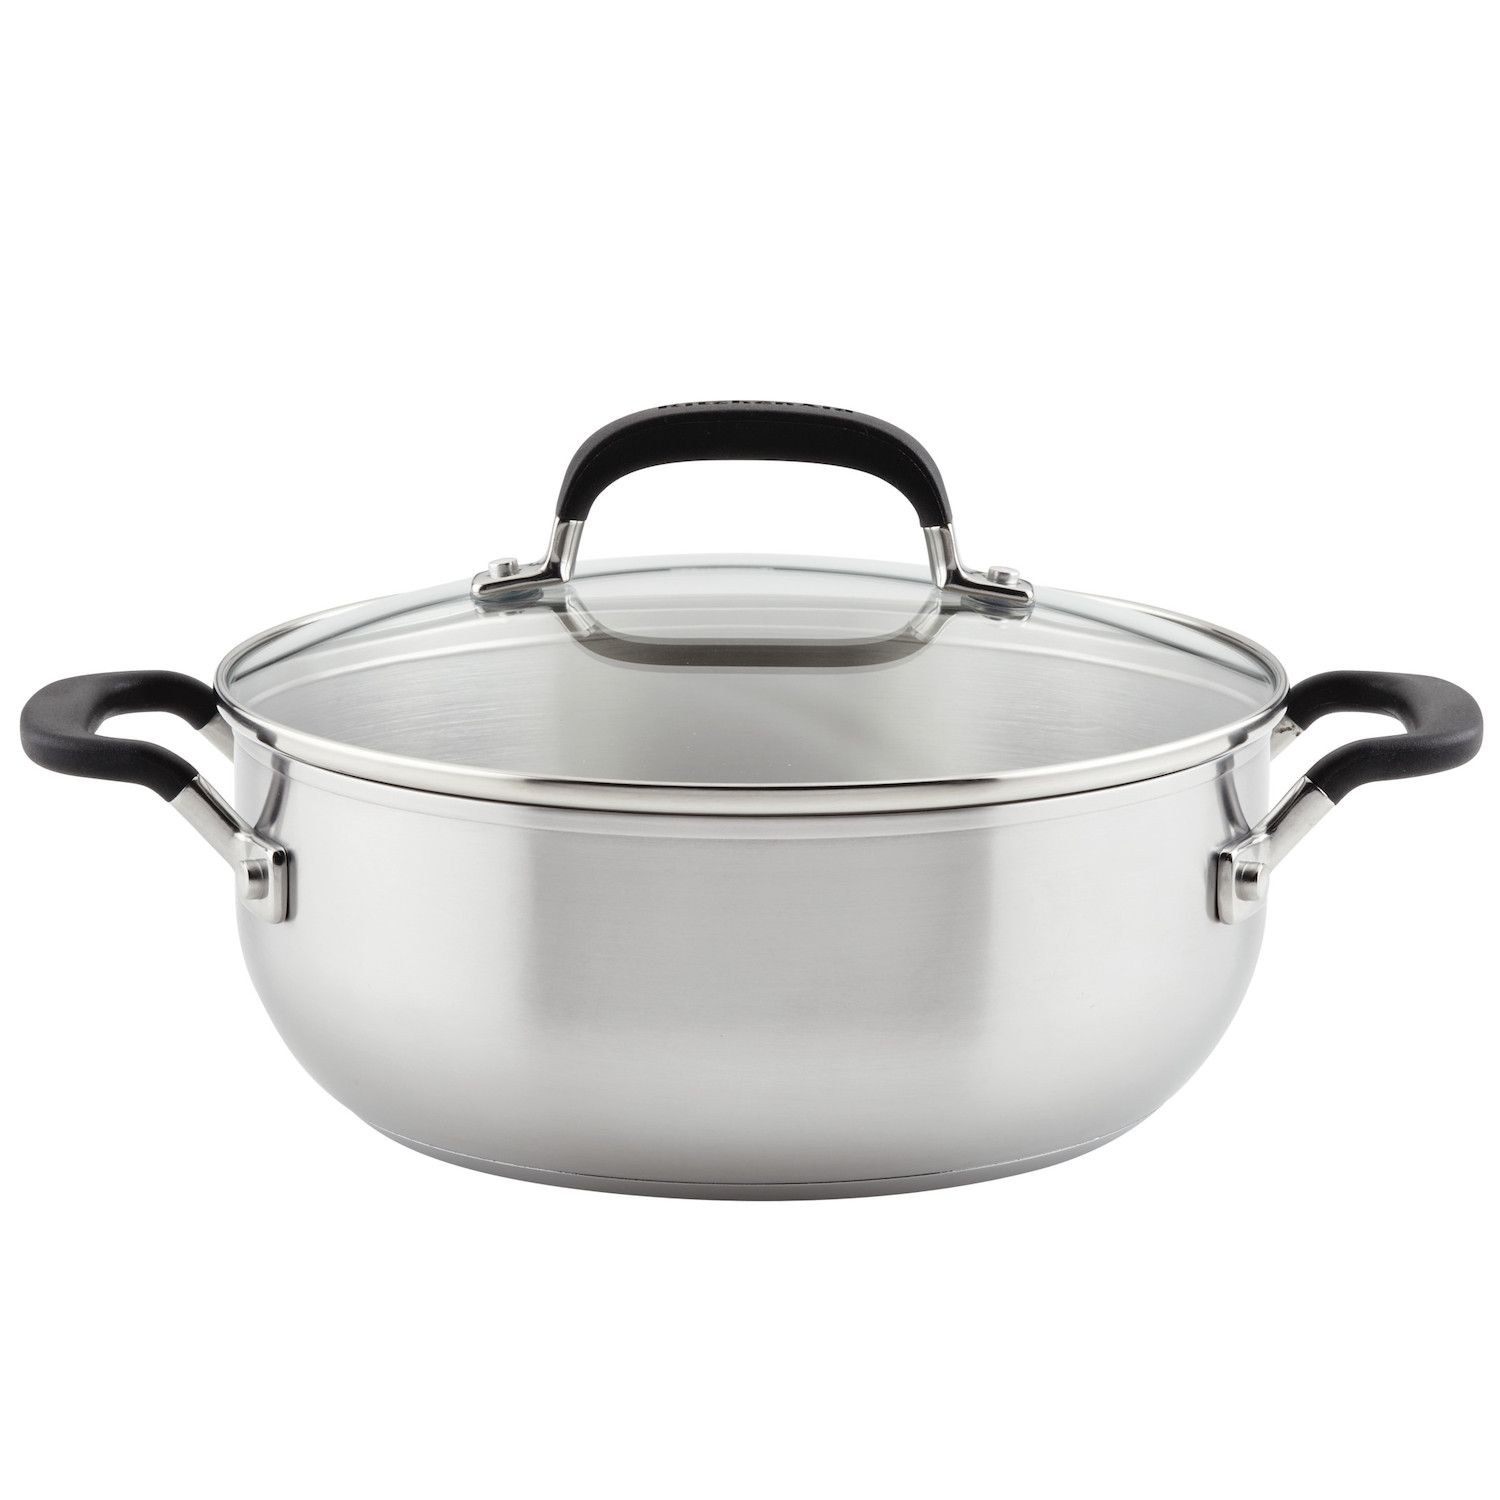 Lexi Home Tri-Ply 4.8 qt. Stainless Steel Casserole Pot with Glass Lid